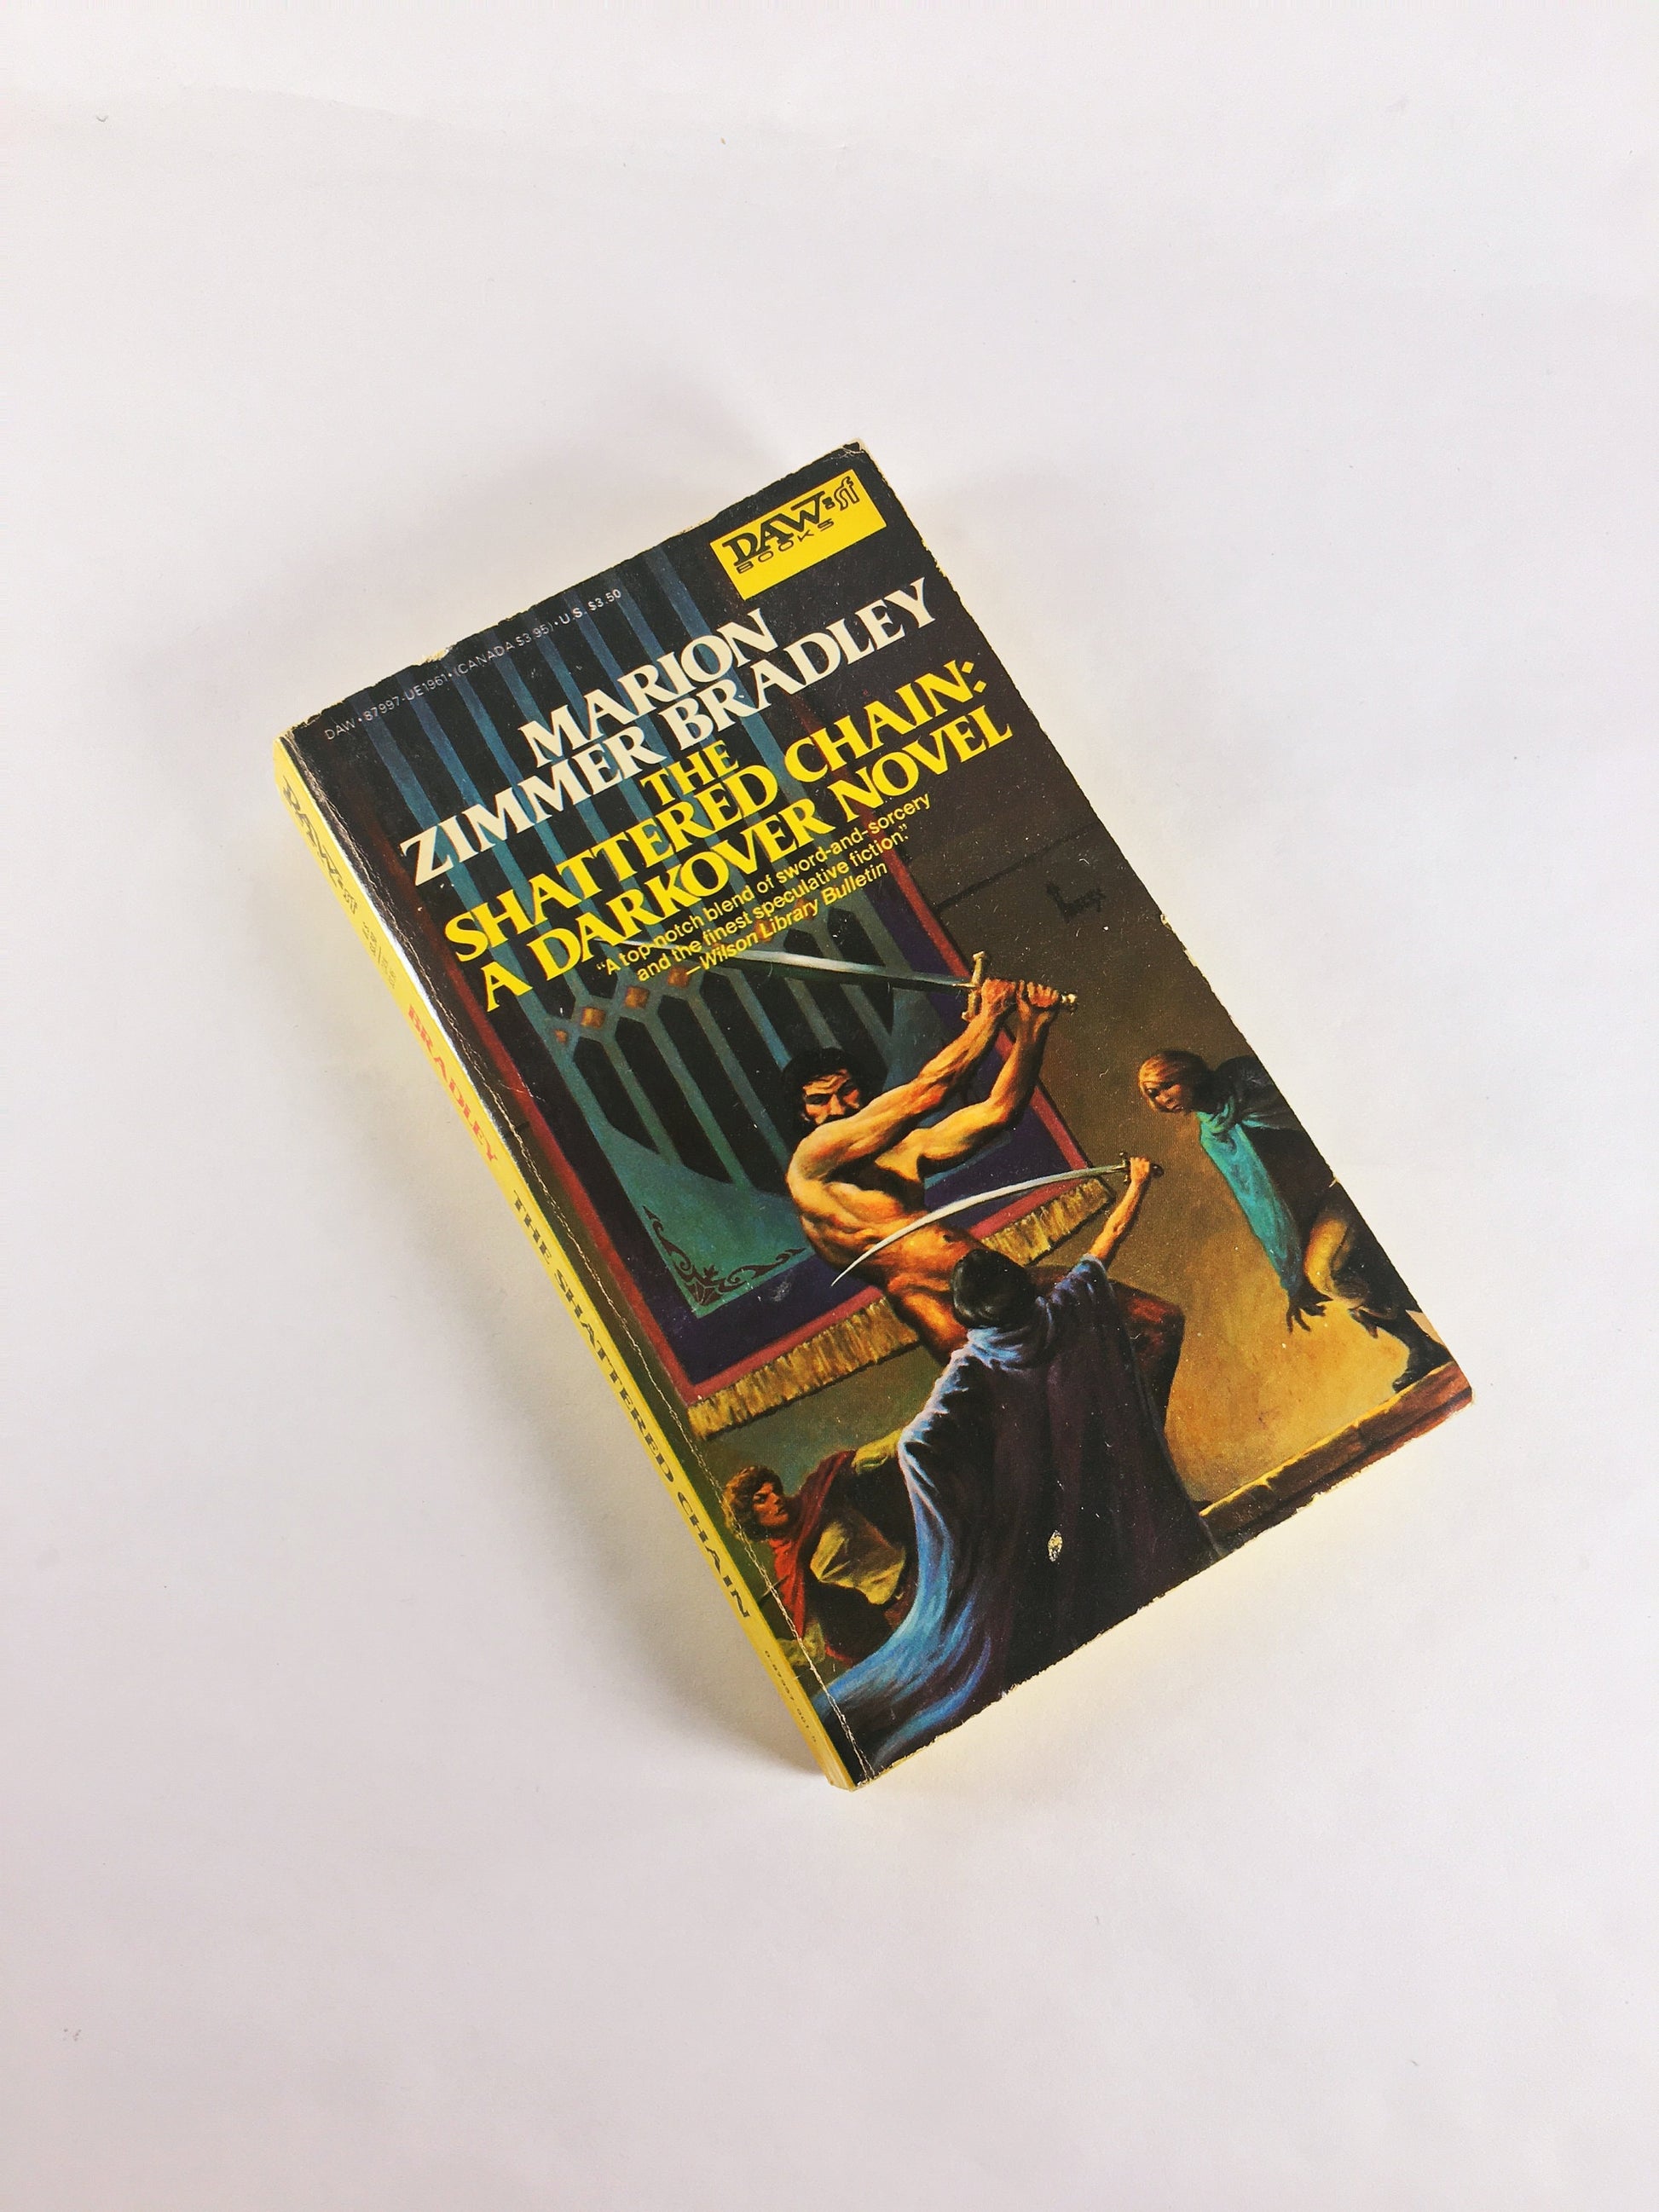 1982 Marion Zimmer Bradley FIRST PRINTING Darkover vintage paperback book Hawkmistress Sword Chaos StormQueen Ace Yellow Science Fiction